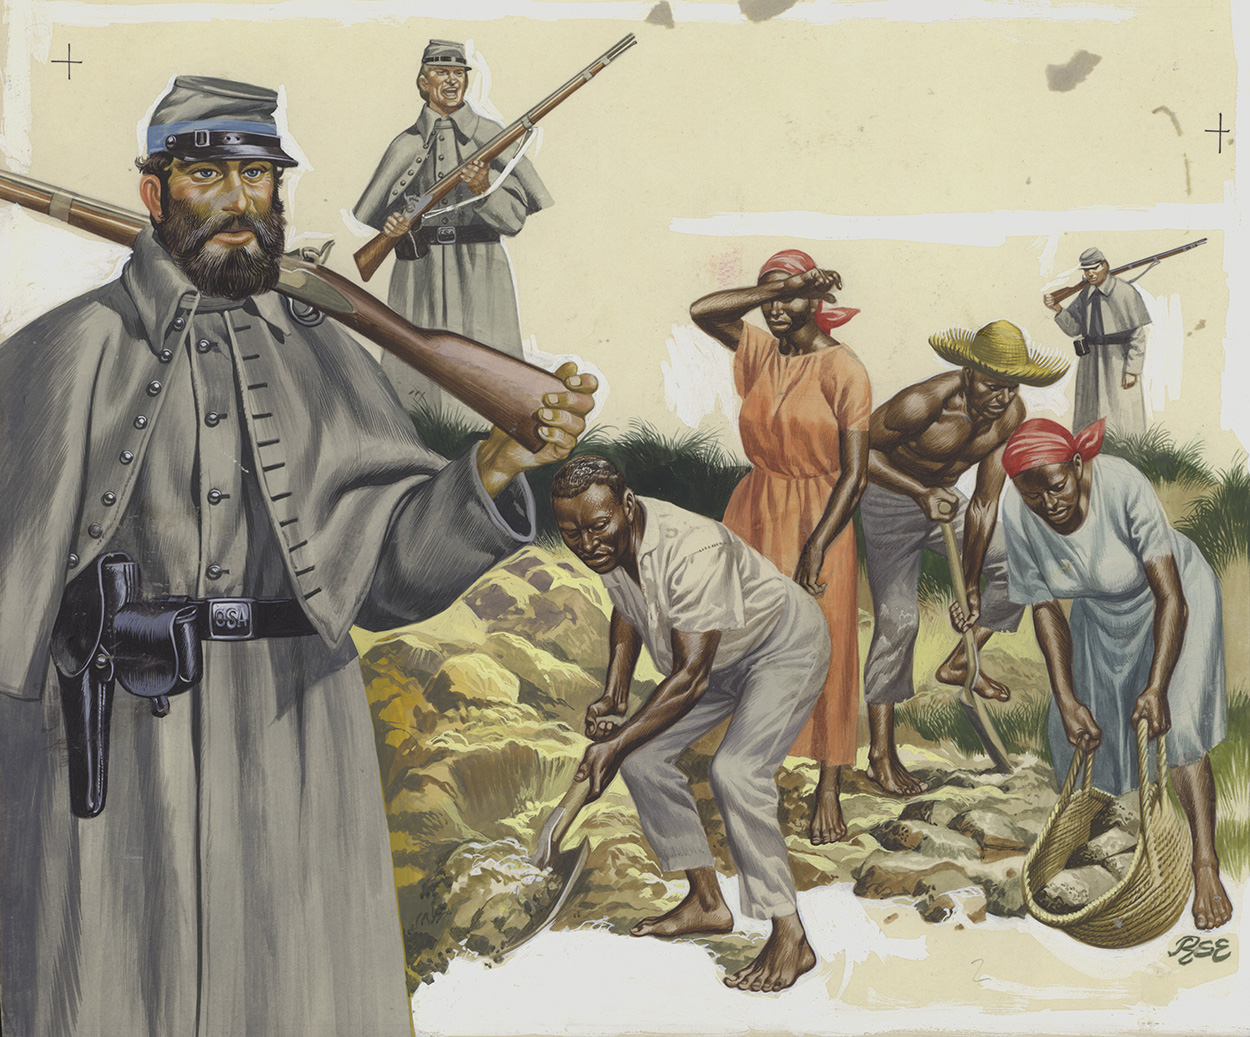 Confederate States of America Soldiers overseeing Slave Labourers (Original) (Signed) art by American History (Ron Embleton) at The Illustration Art Gallery